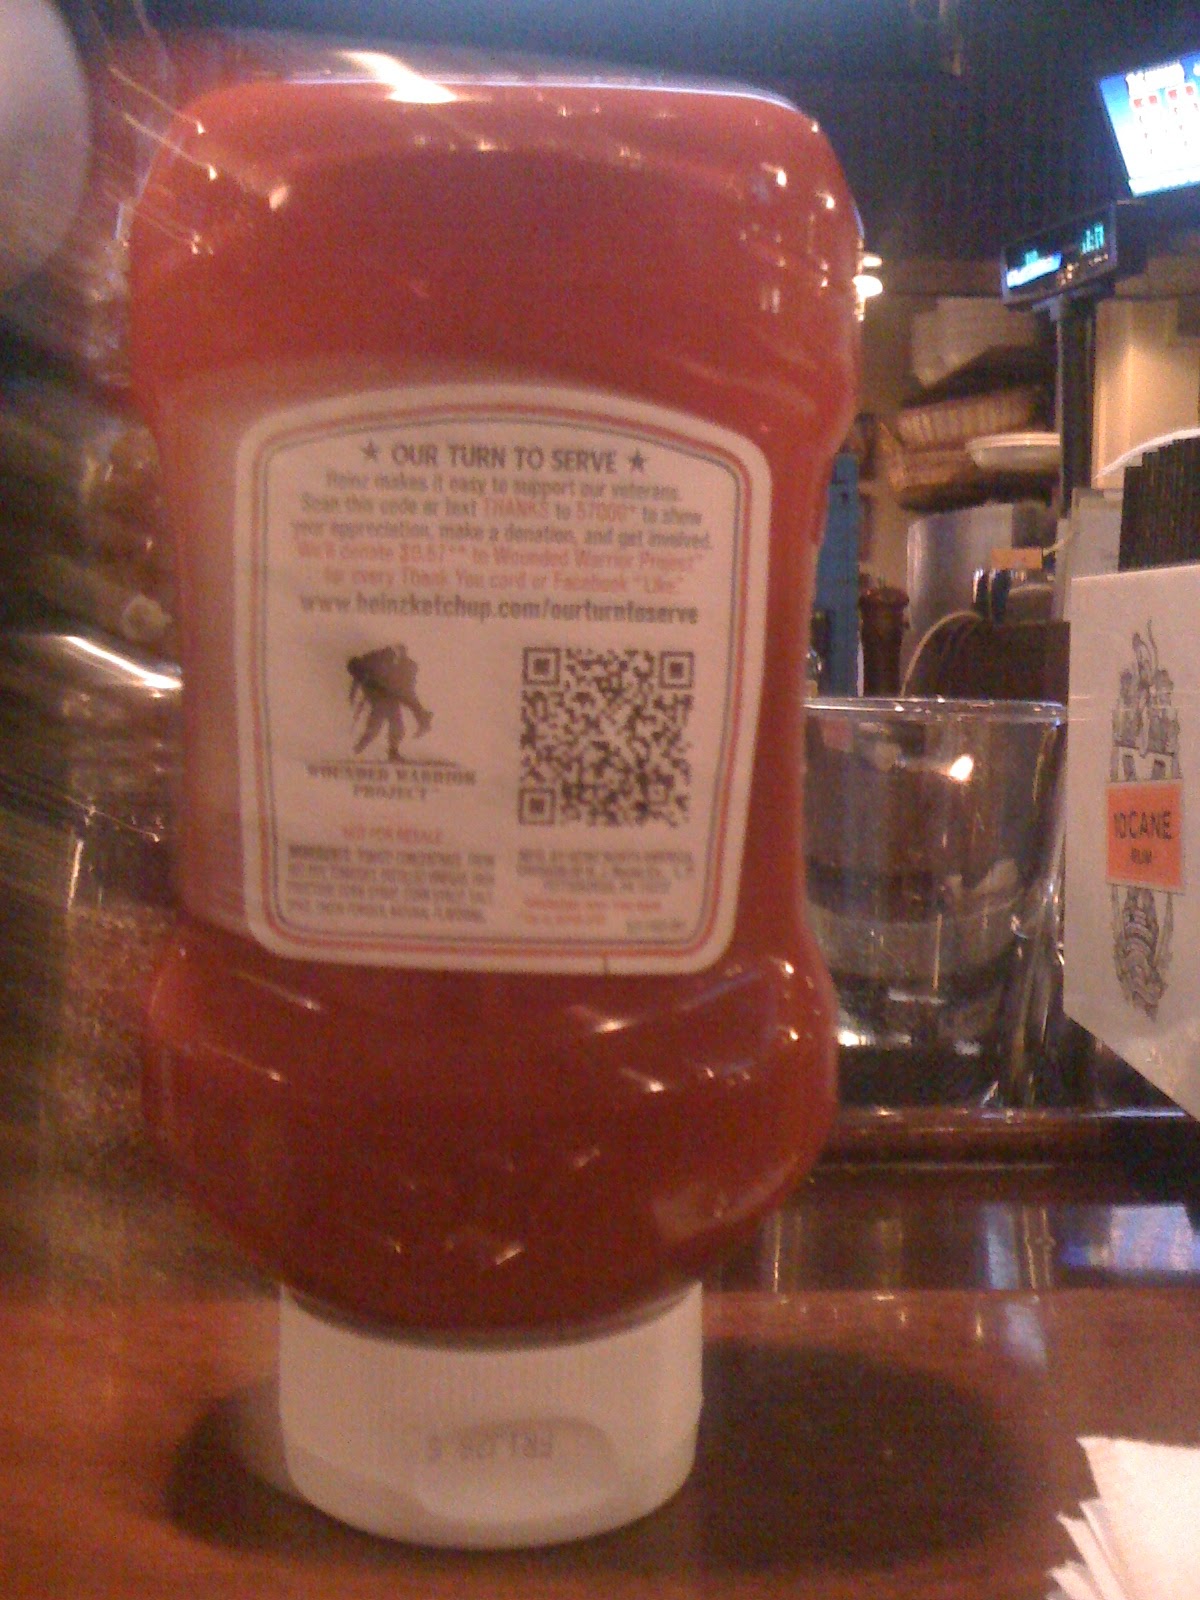 Improving It Qr Code Blunders 2 Heinz Ketchup Our Turn To Serve